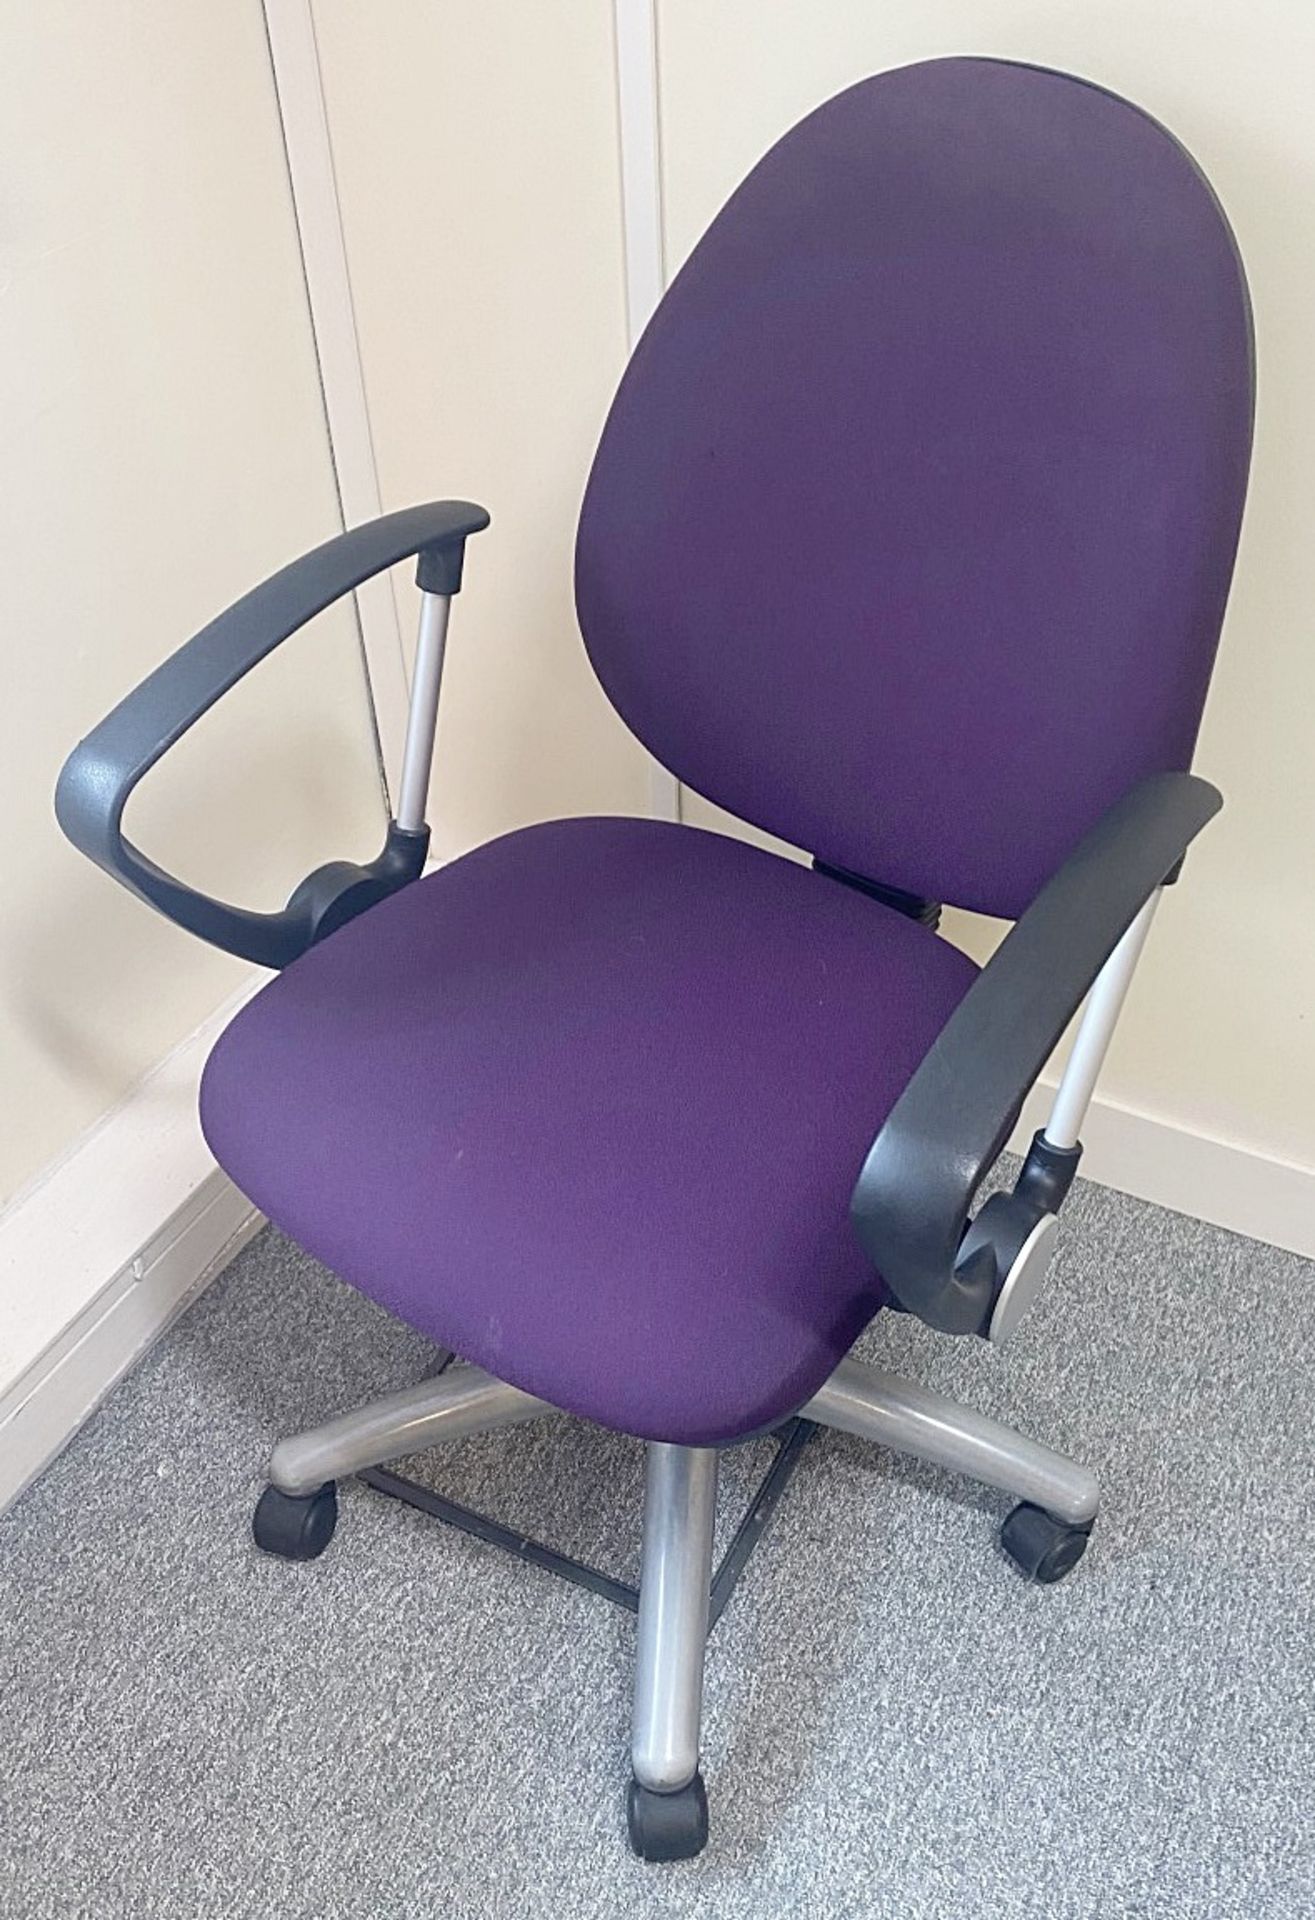 4 x TORASEN 'Mercury' Office Purple Swivel Chairs (M60A) - From An Executive Office Environment -